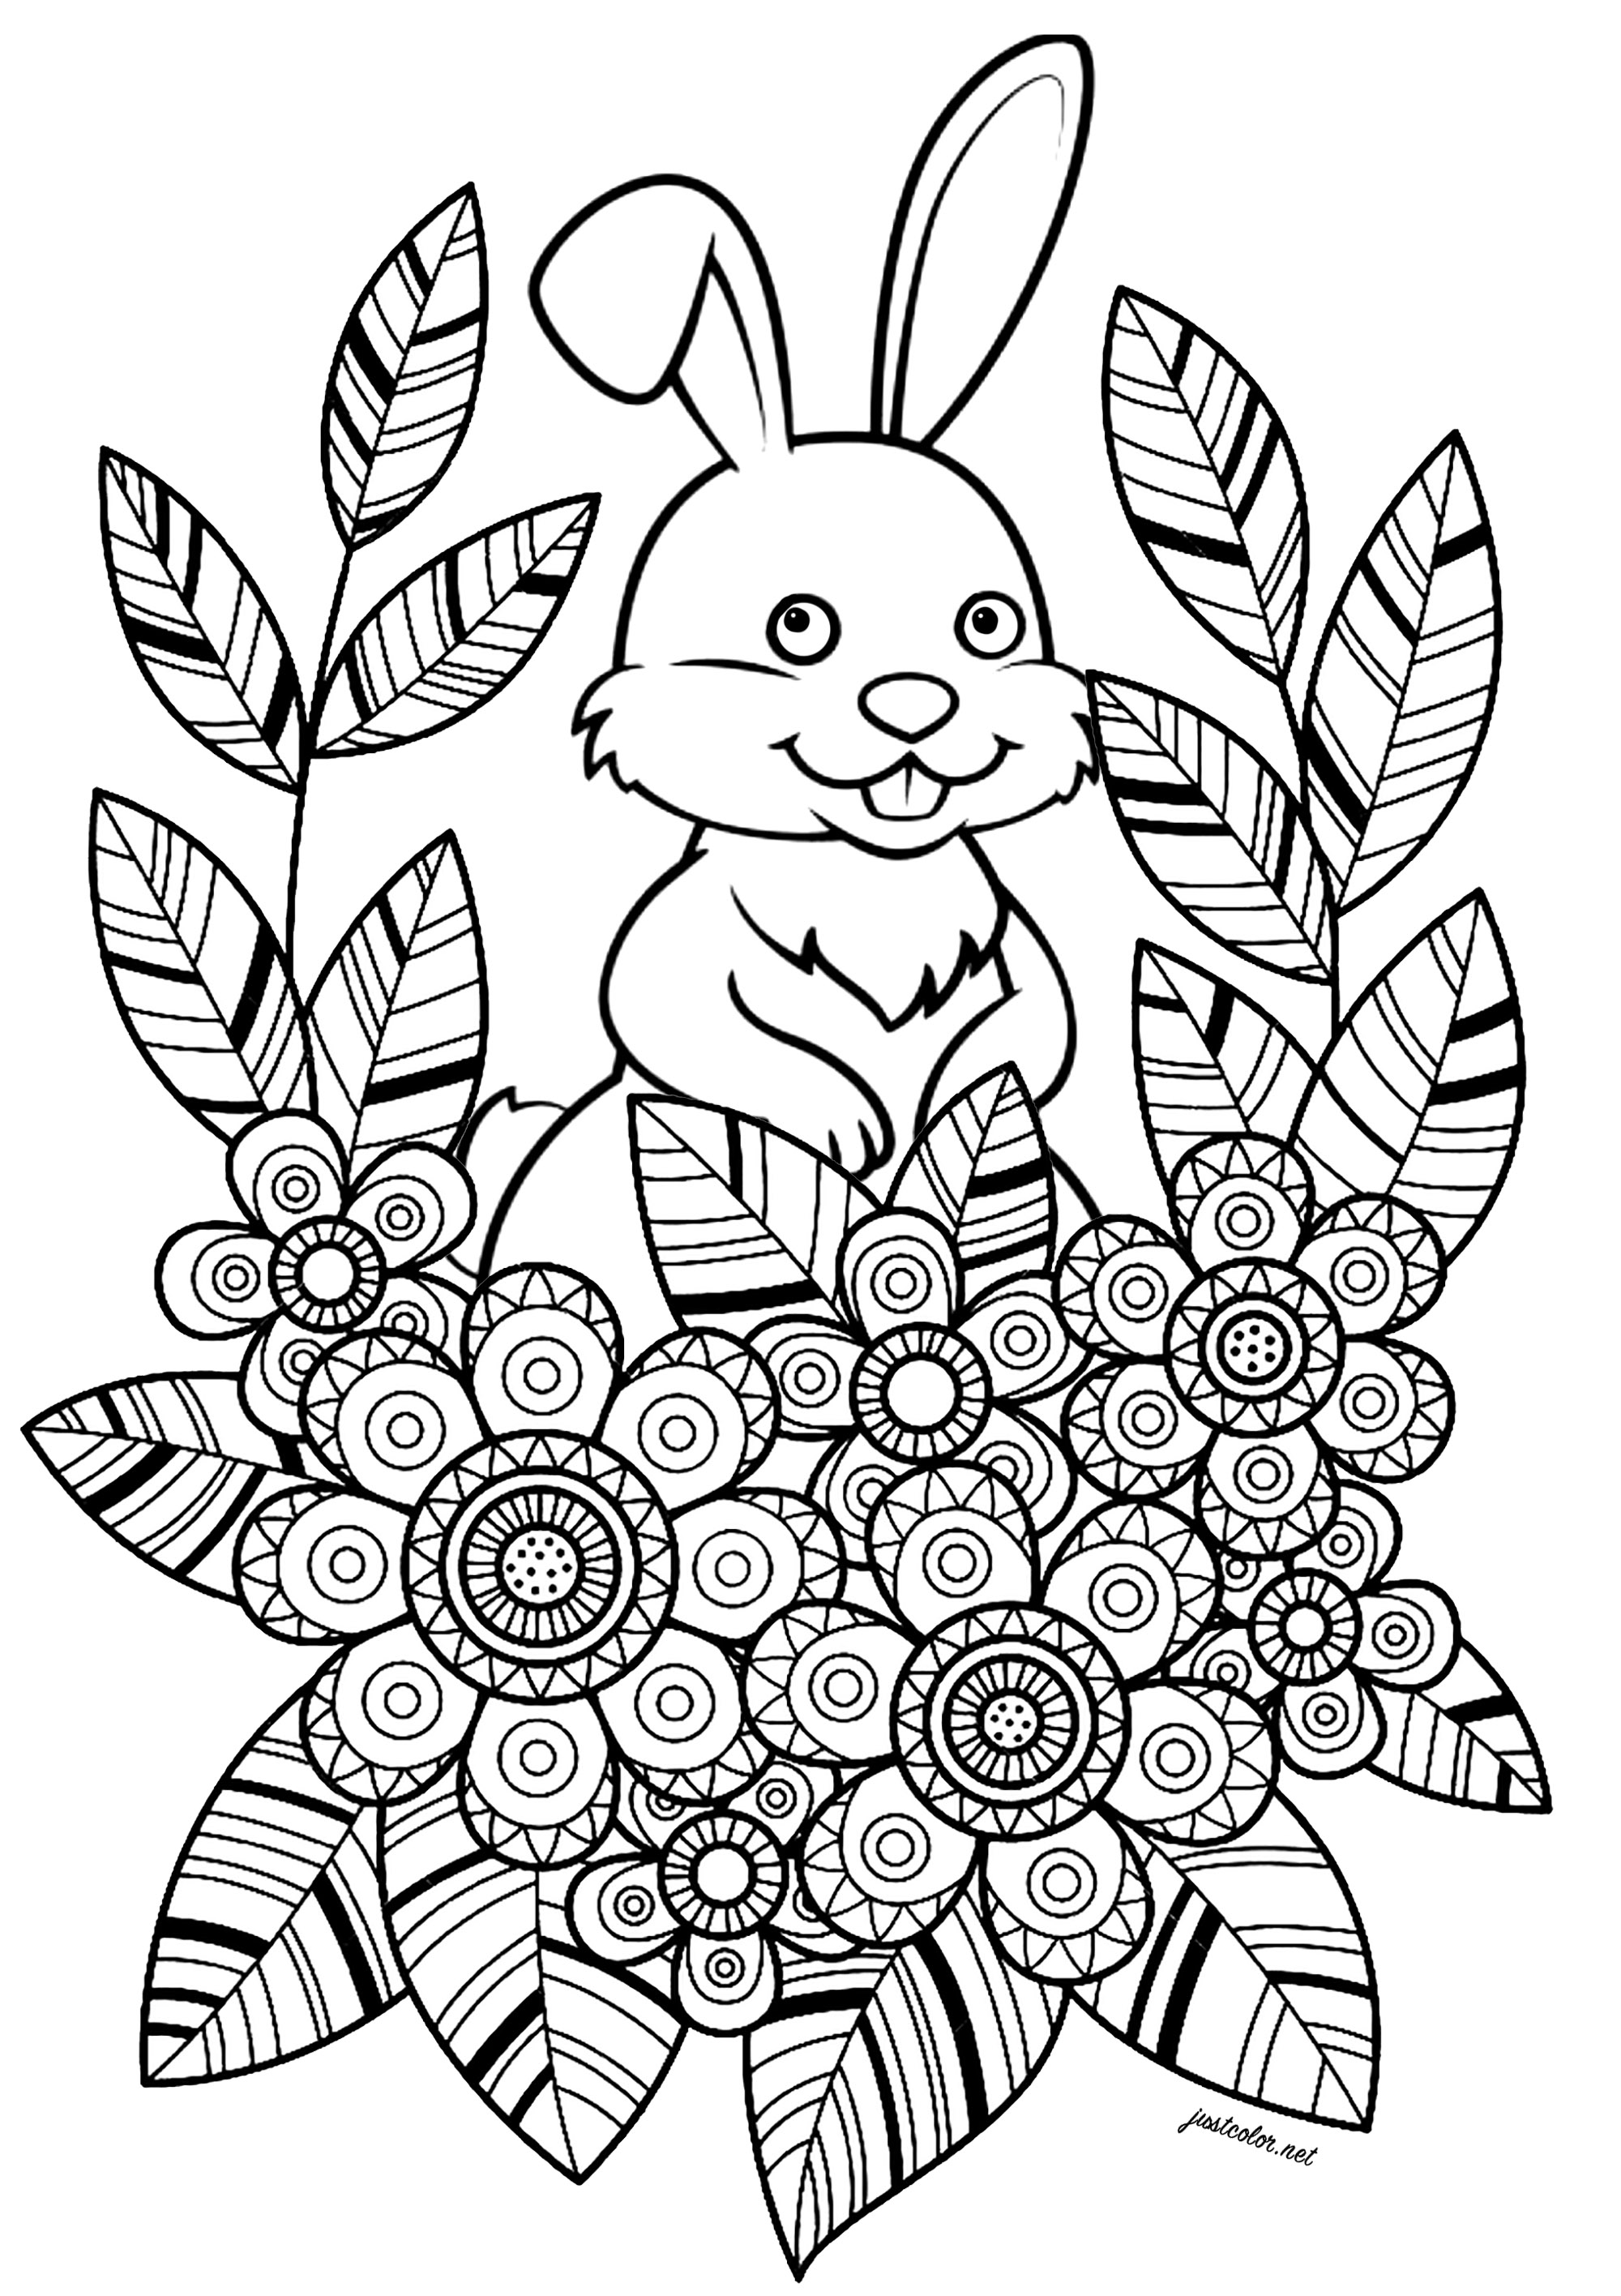 Rabbit with flowers and leaves in a pretty design. This simple, charming coloring page features a white rabbit hiding behind flowers and leaves. The flowers and leaves are drawn in a very coloring-friendly style, with well-defined areas and pretty patterns.